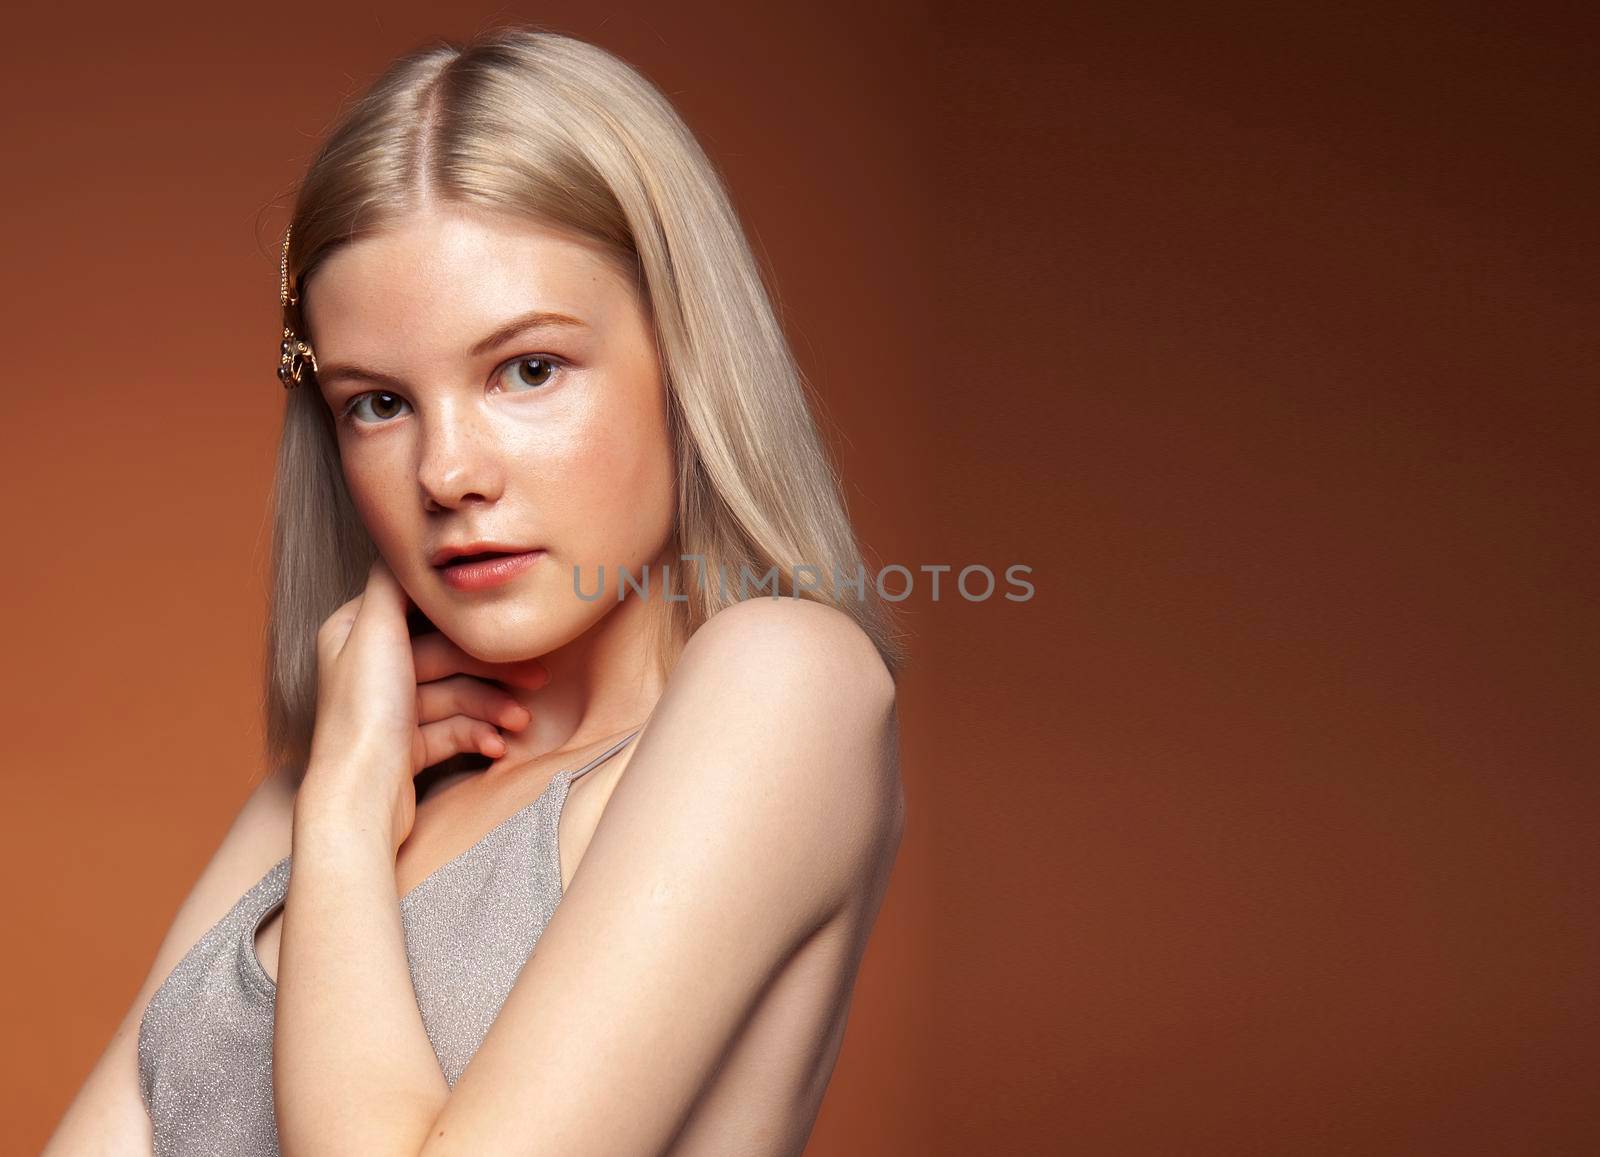 young pretty girl with blond hair posing cheerful on brown background, lifestyle people concept by JordanJ